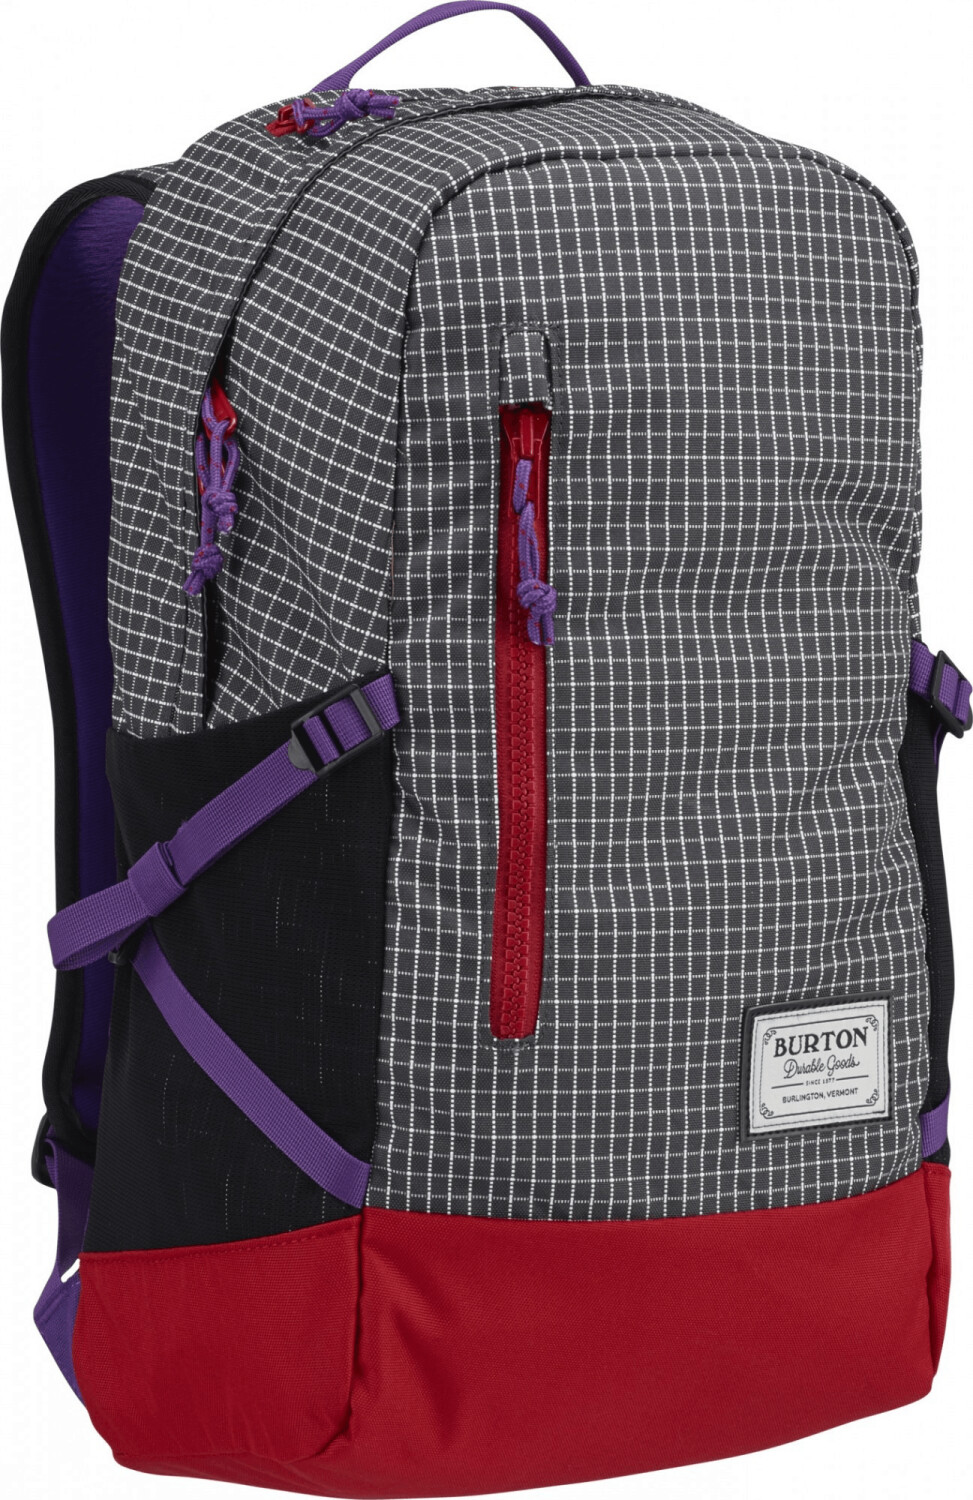 Burton Prospect Backpack faded ripstop